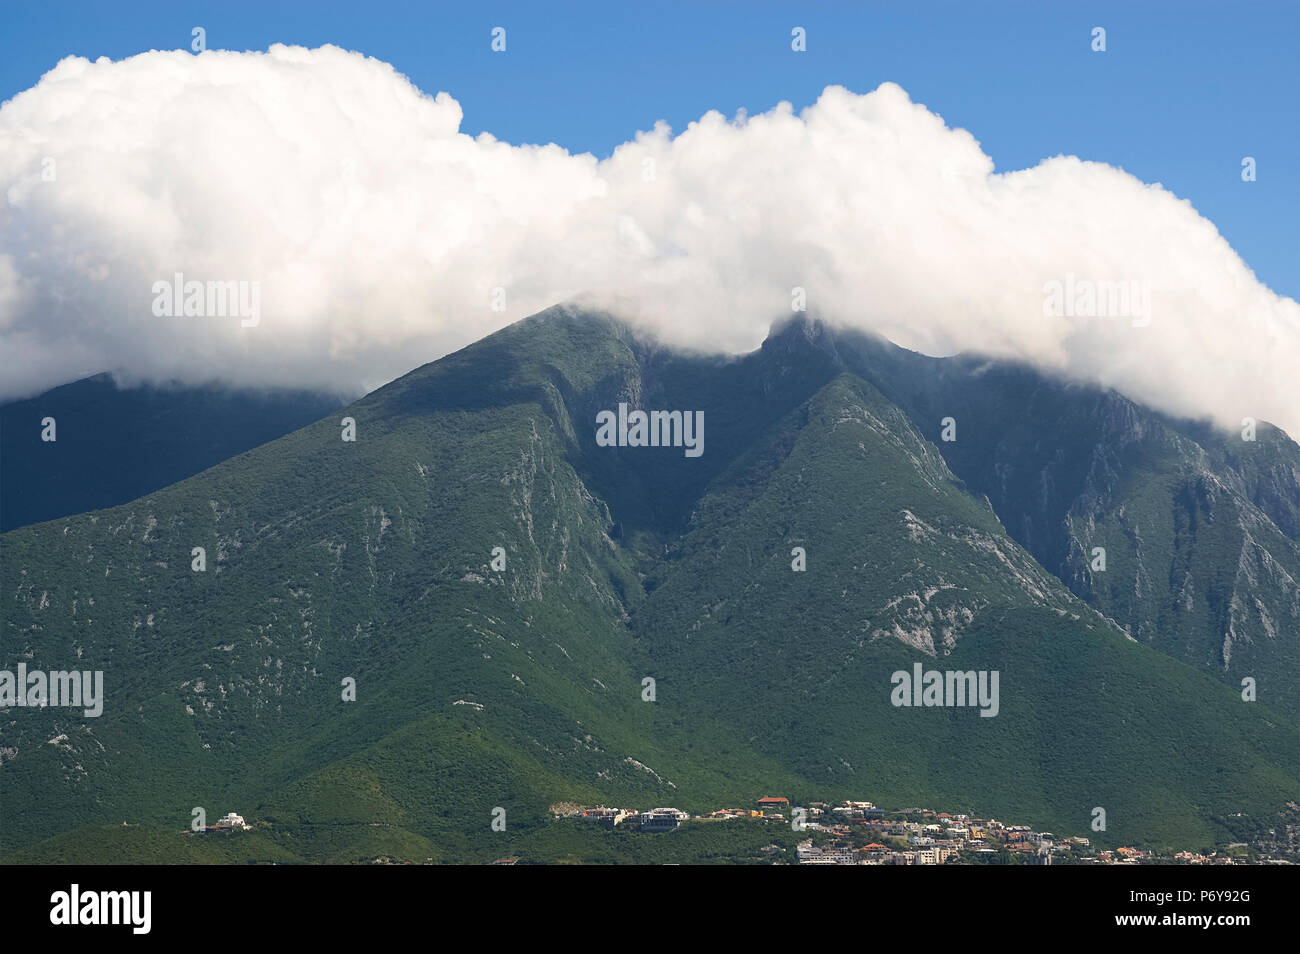 La Silla Hill, named this way because it resembles a saddle, covered in clouds. The hill is a landmark for the city of Monterrey, Nuevo Leon, Mexico. Stock Photo